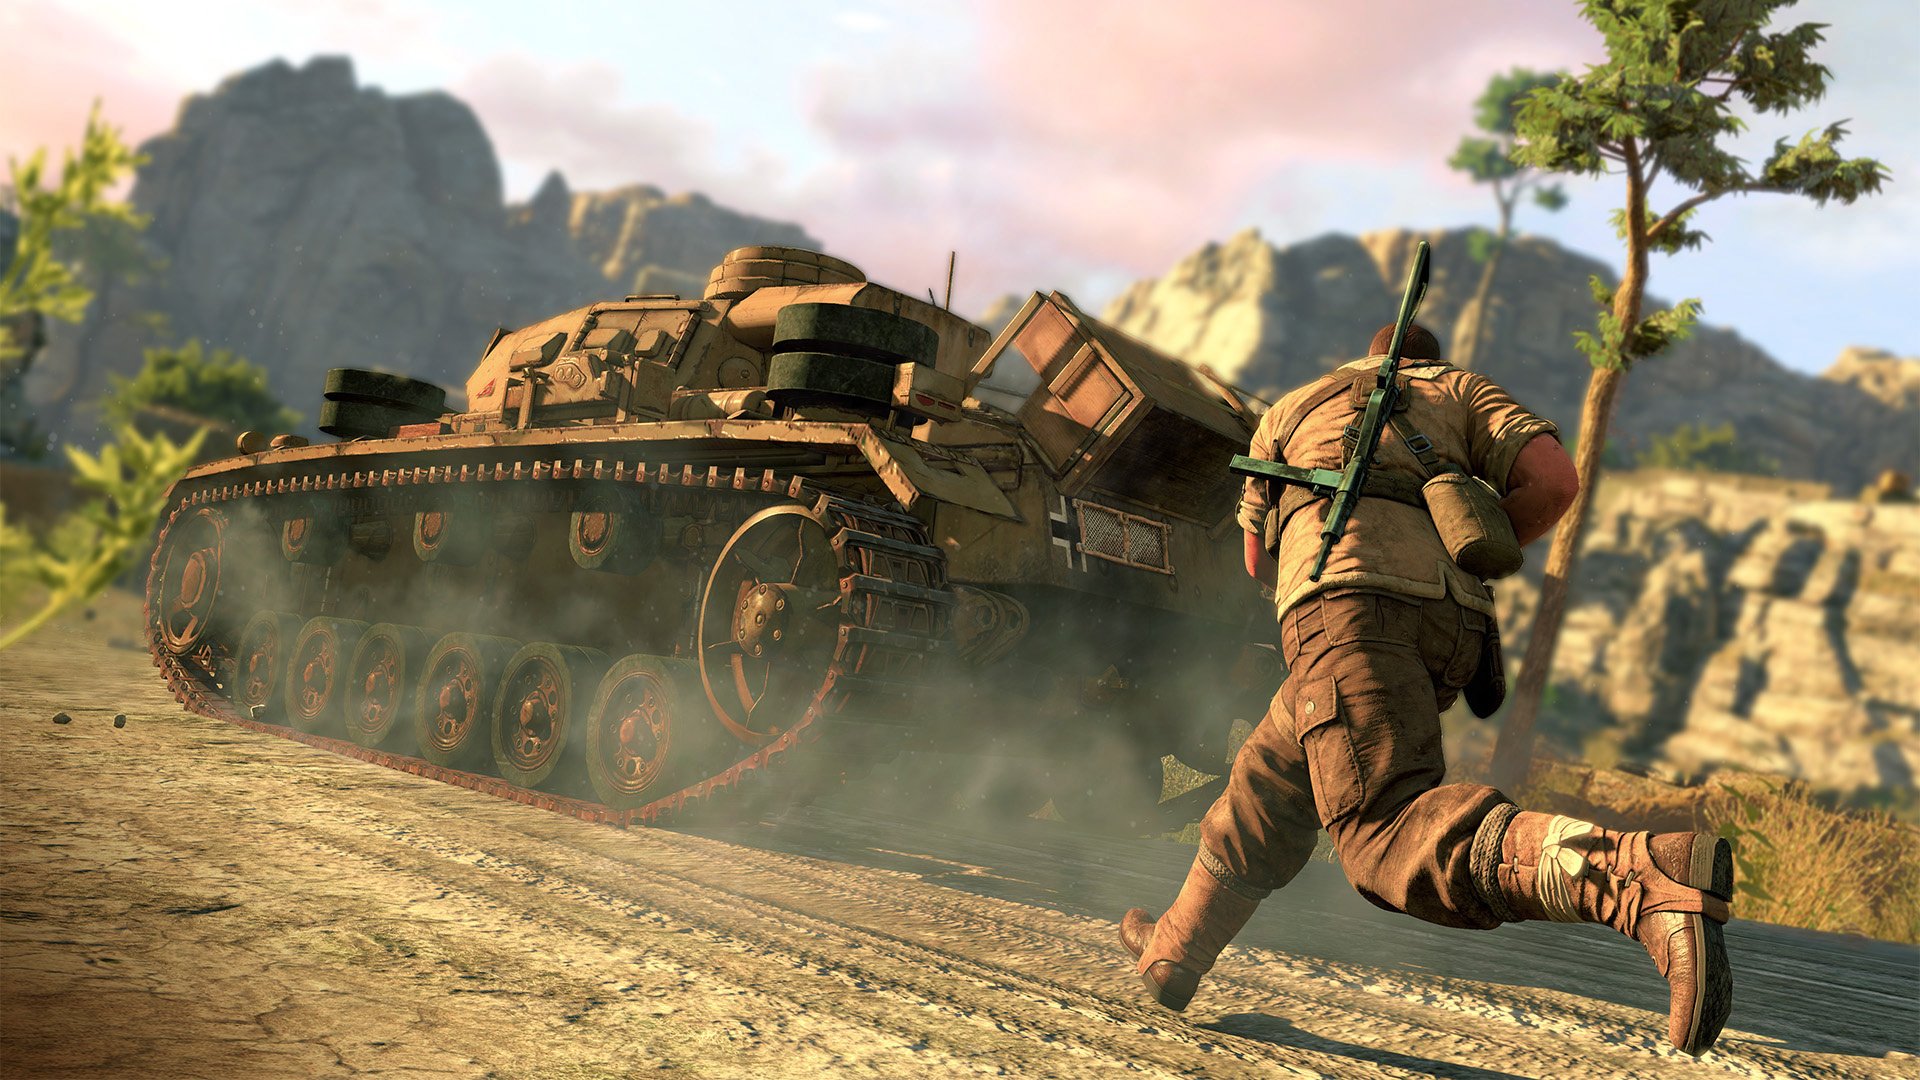 Sniper Elite III (PS3 / PlayStation 3) Game Profile | News, Reviews